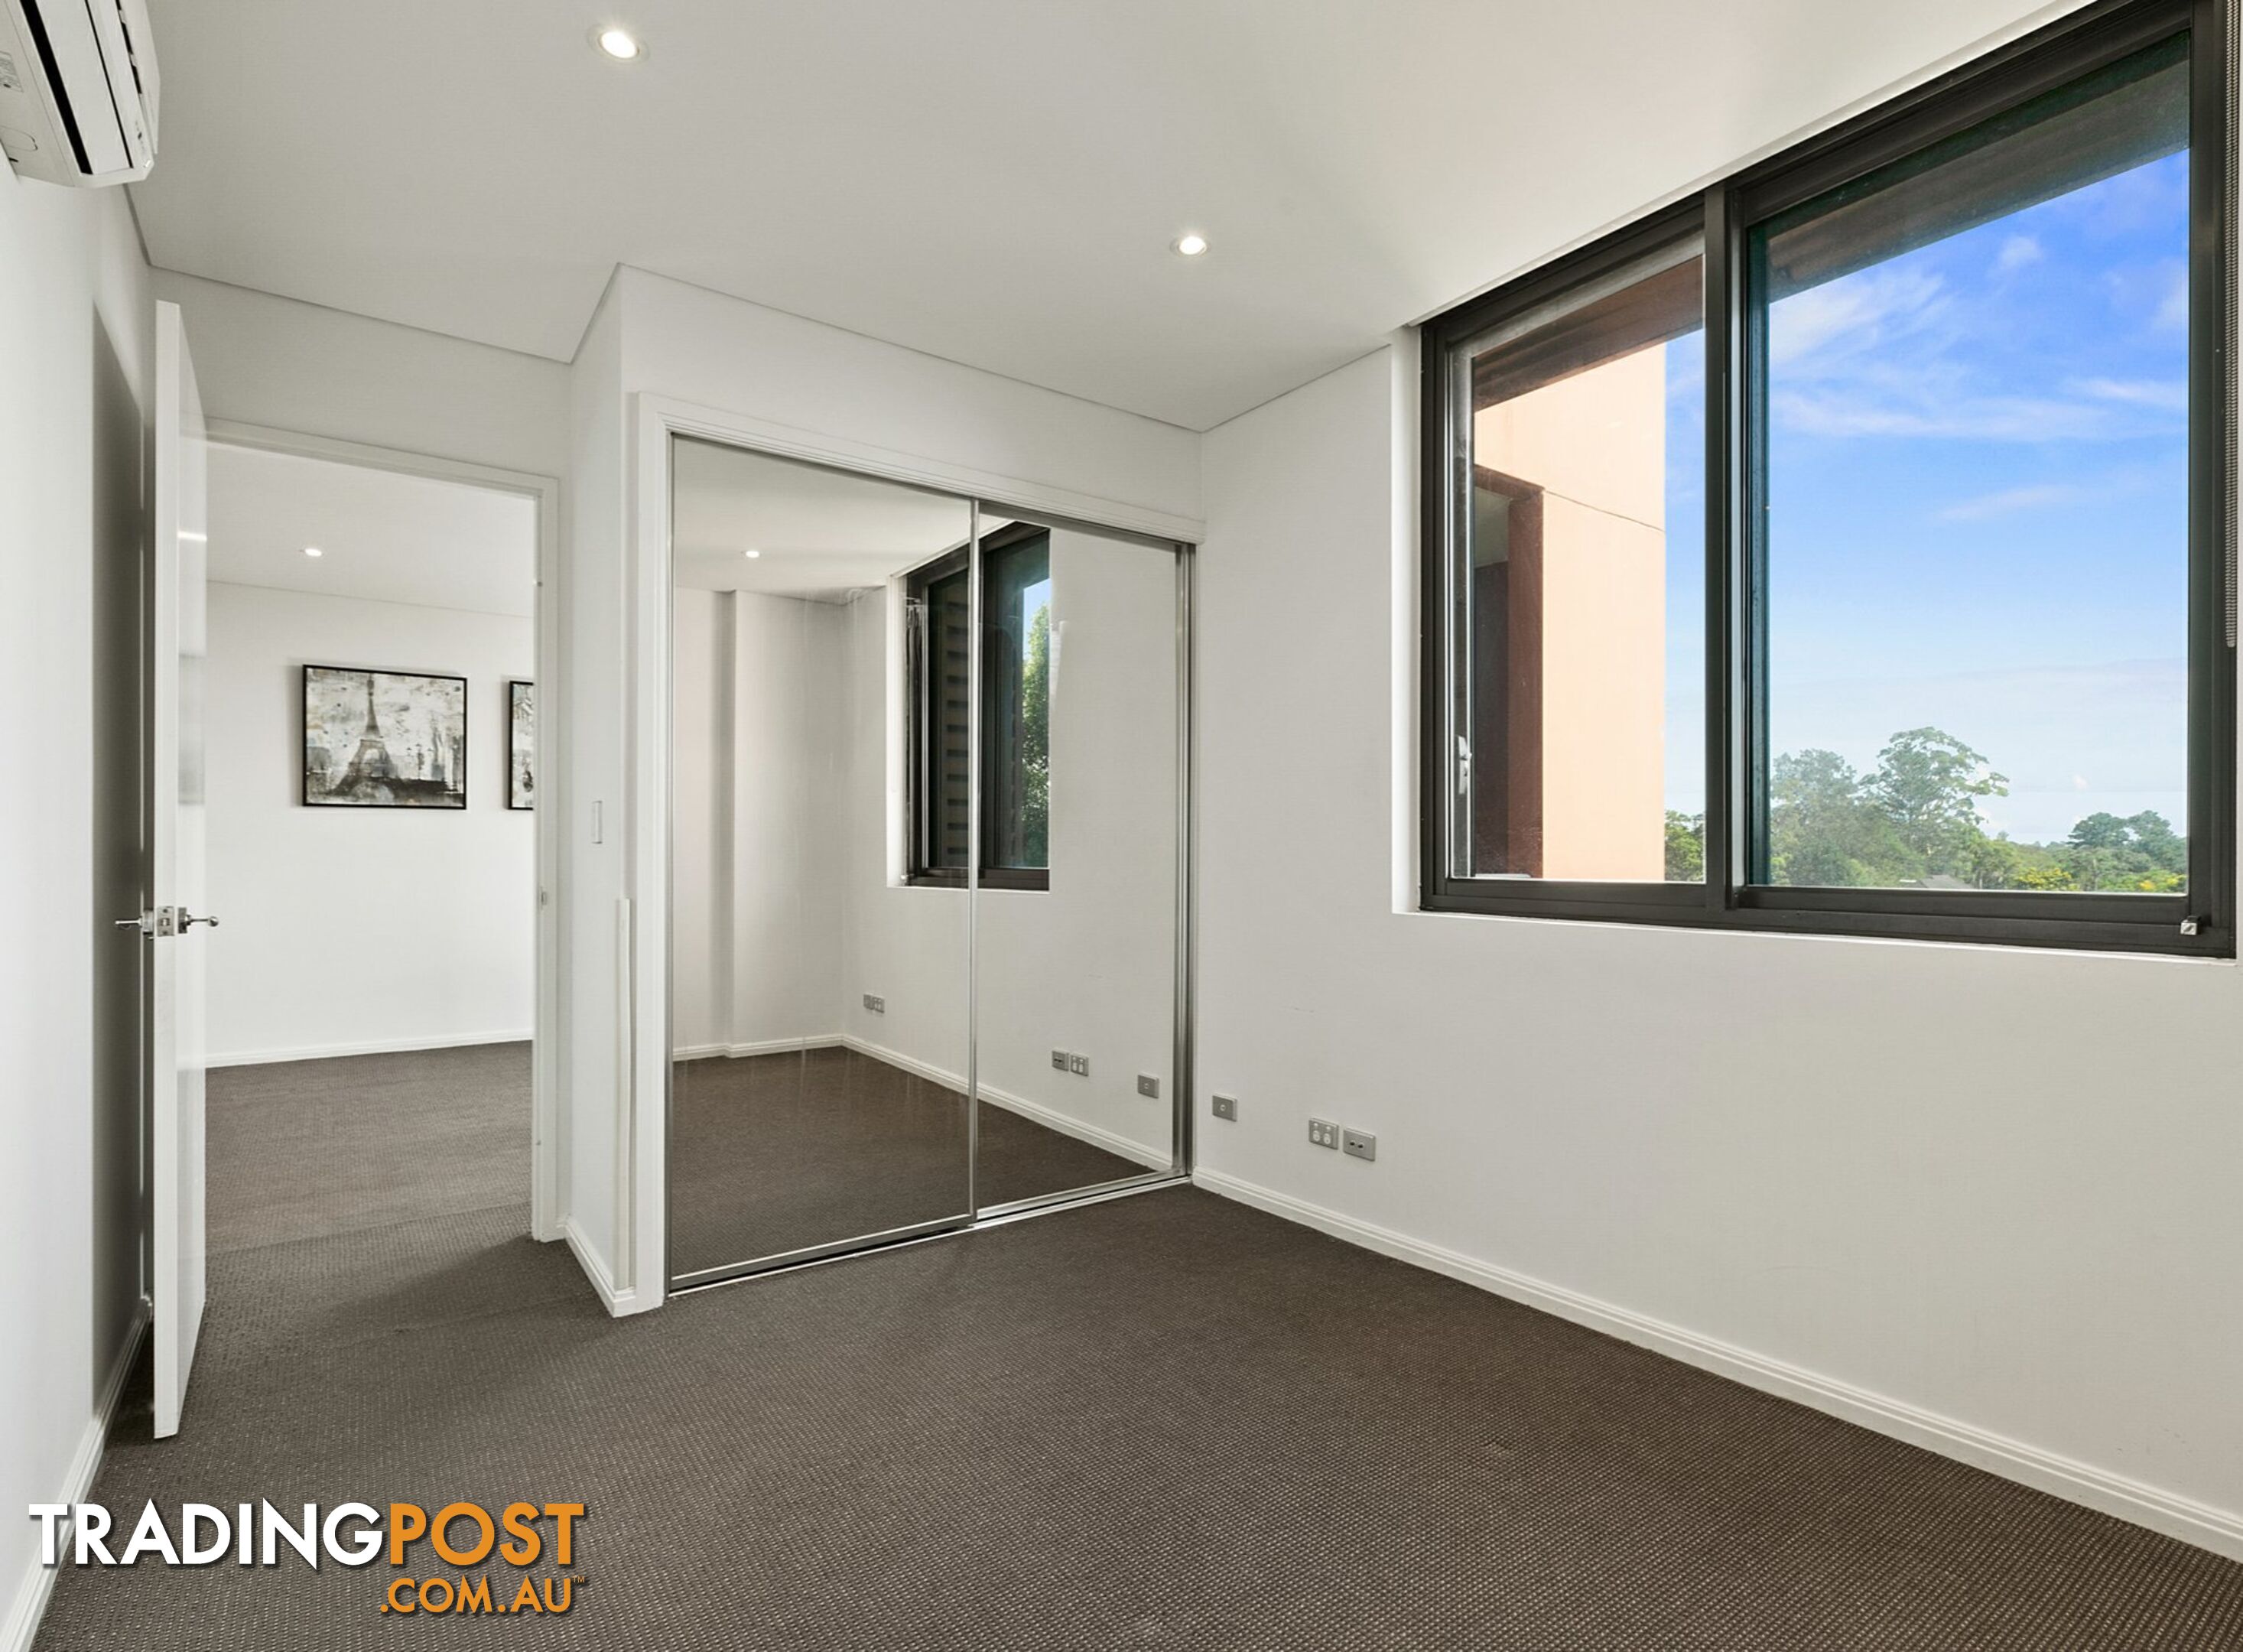 513/17-19 Memorial Avenue ST IVES NSW 2075